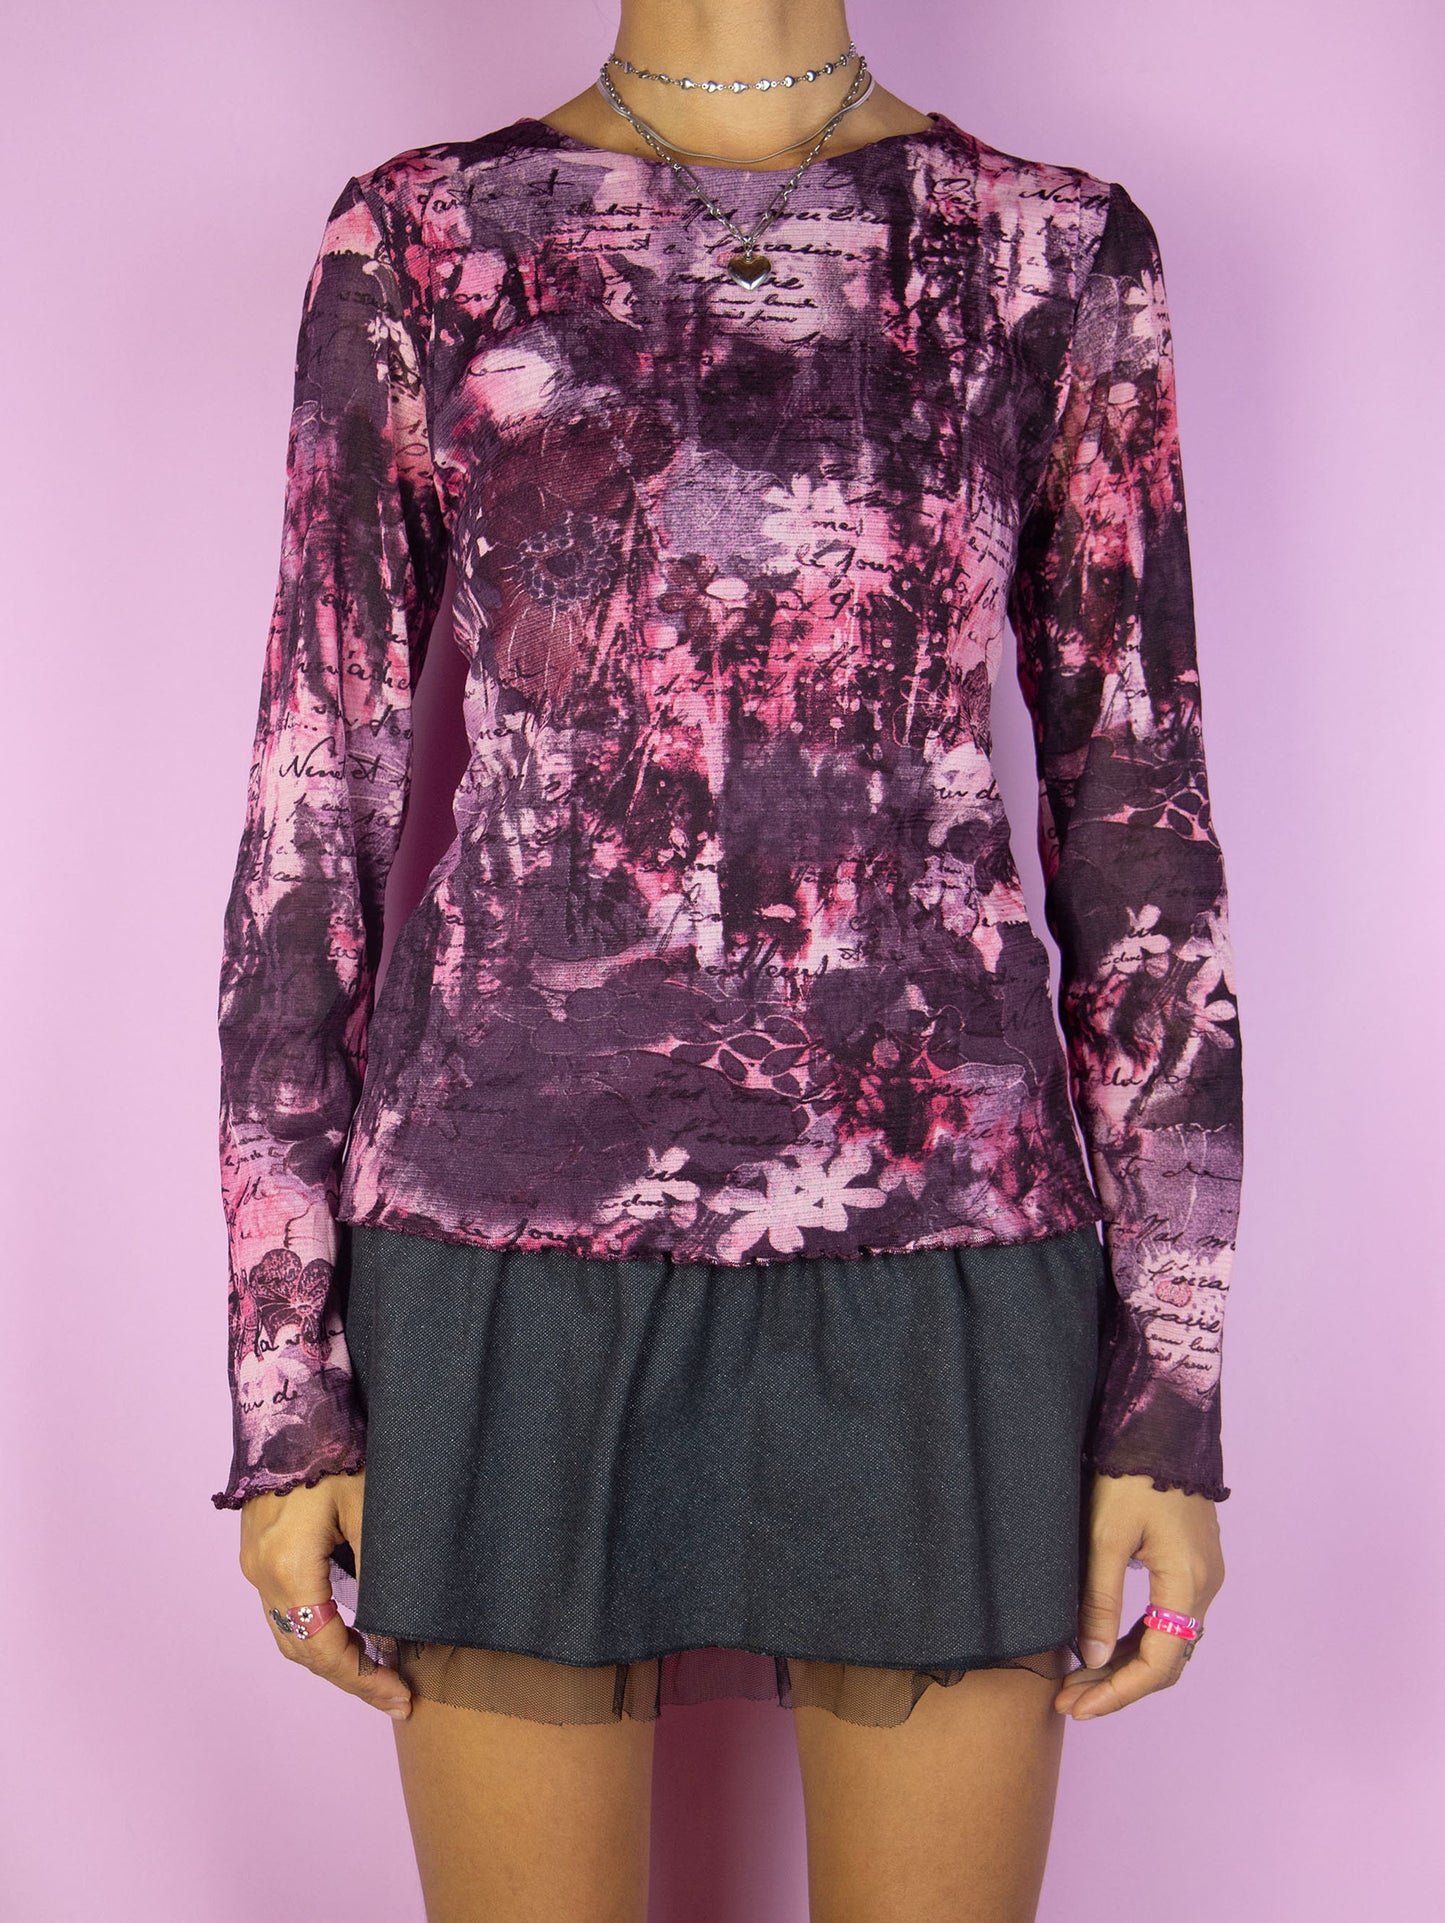 The Vintage Y2K Purple Abstract Mesh Top is a dark purple maroon and pink floral abstract print semi-sheer mesh lettuce hem long sleeve top. Super cute cyber fairy grunge gorpcore shirt circa 2000's.